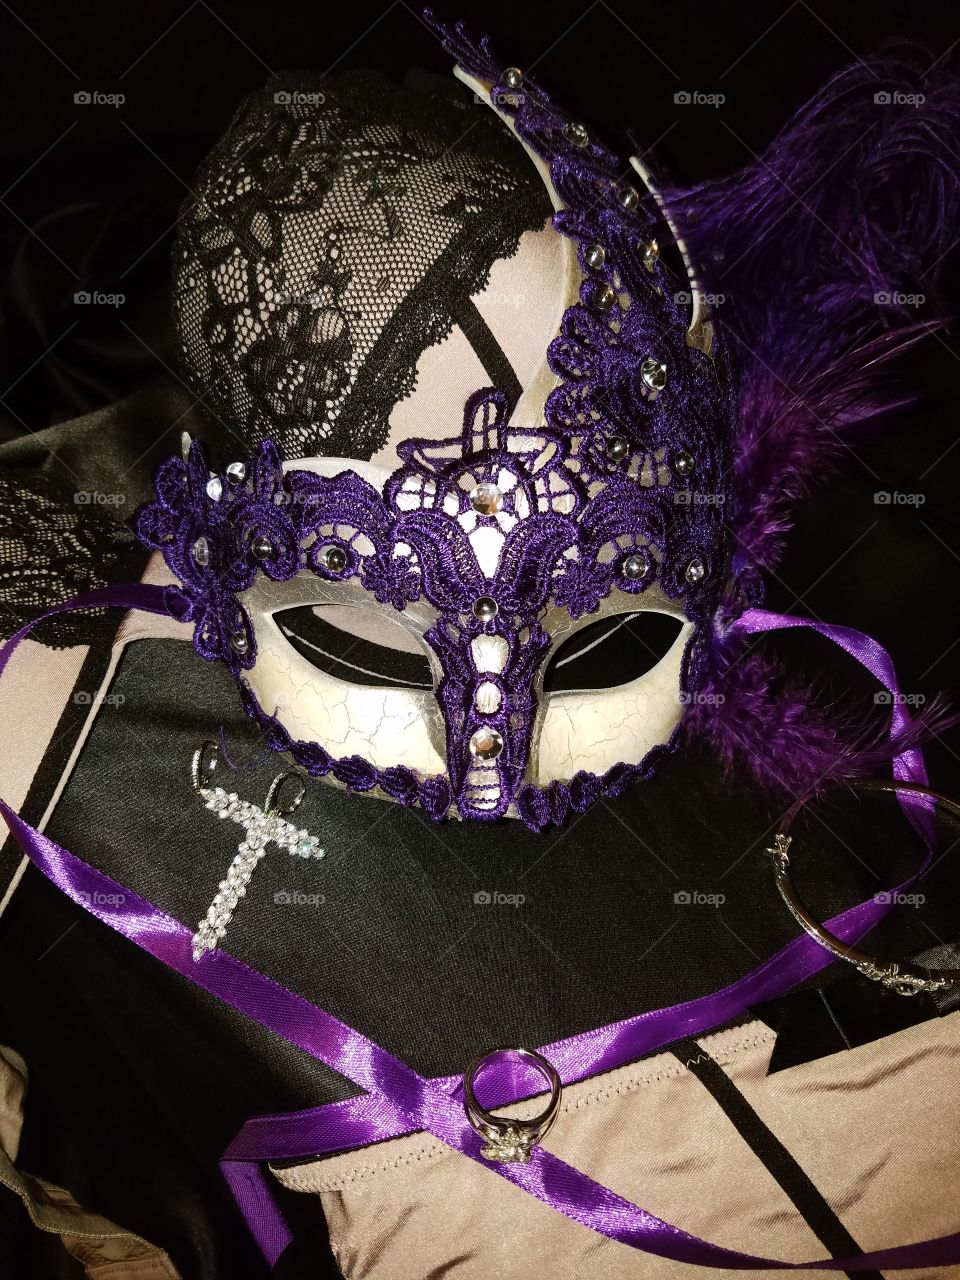 purple laced Mardi Gras mask with purple feather and purple satin ribbons. mob lingerie with black accent and Diamond Jewelry earrings ,fleur-de-lis diamond ring and bracelet